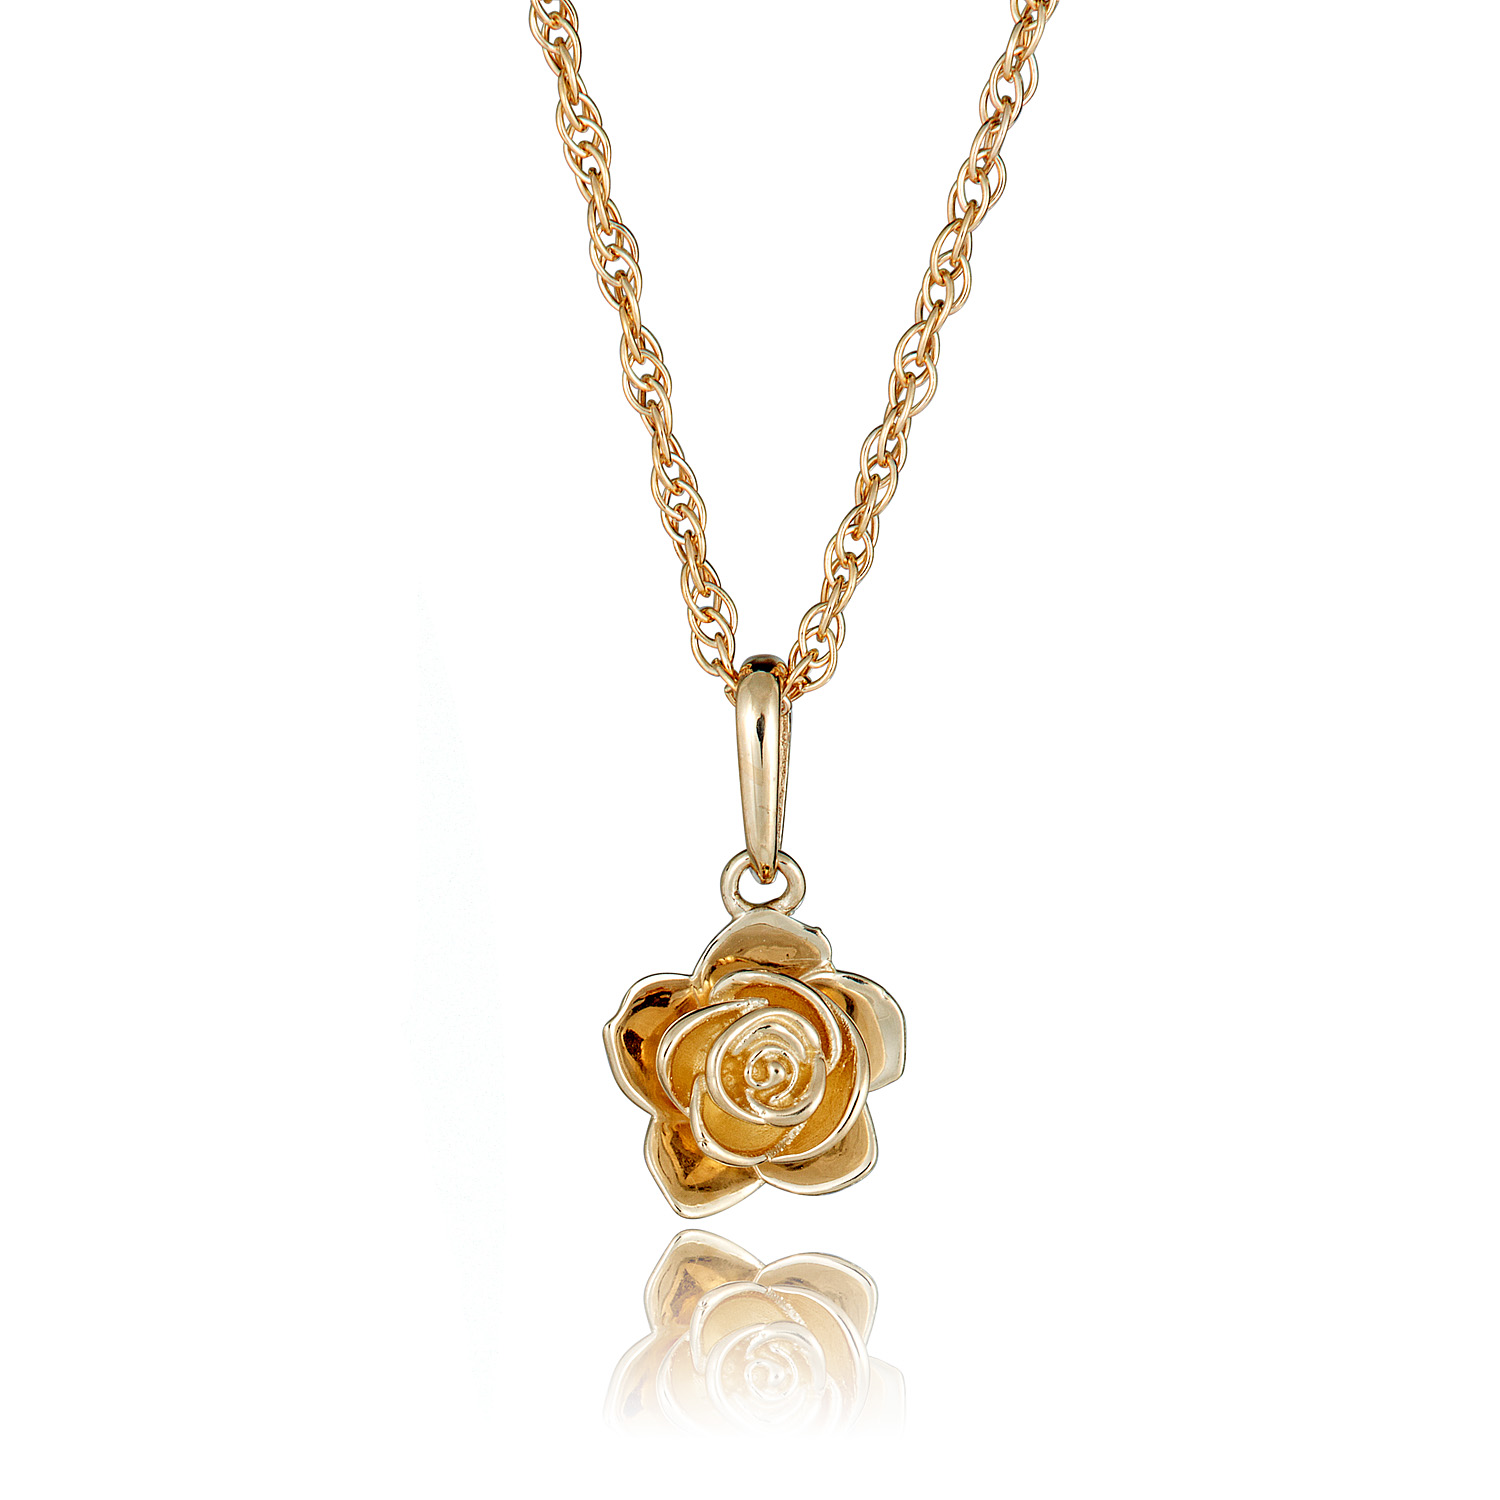 AVORA 10K Yellow Gold Rose Pendant Necklace with 18" Chain